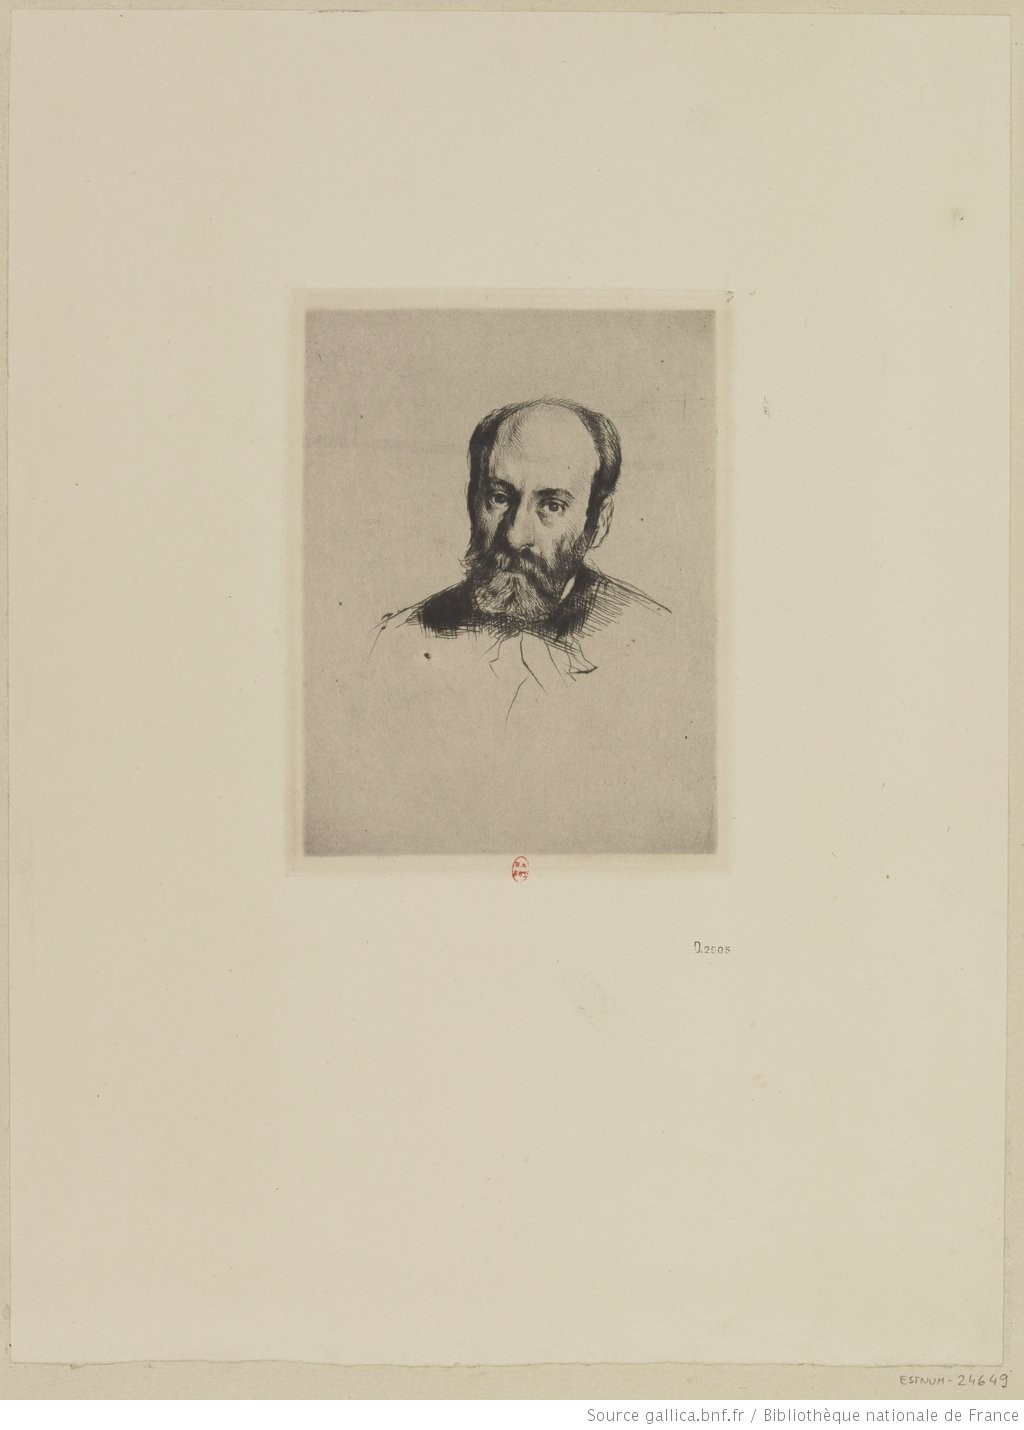 Drawing of Philippe Sichel